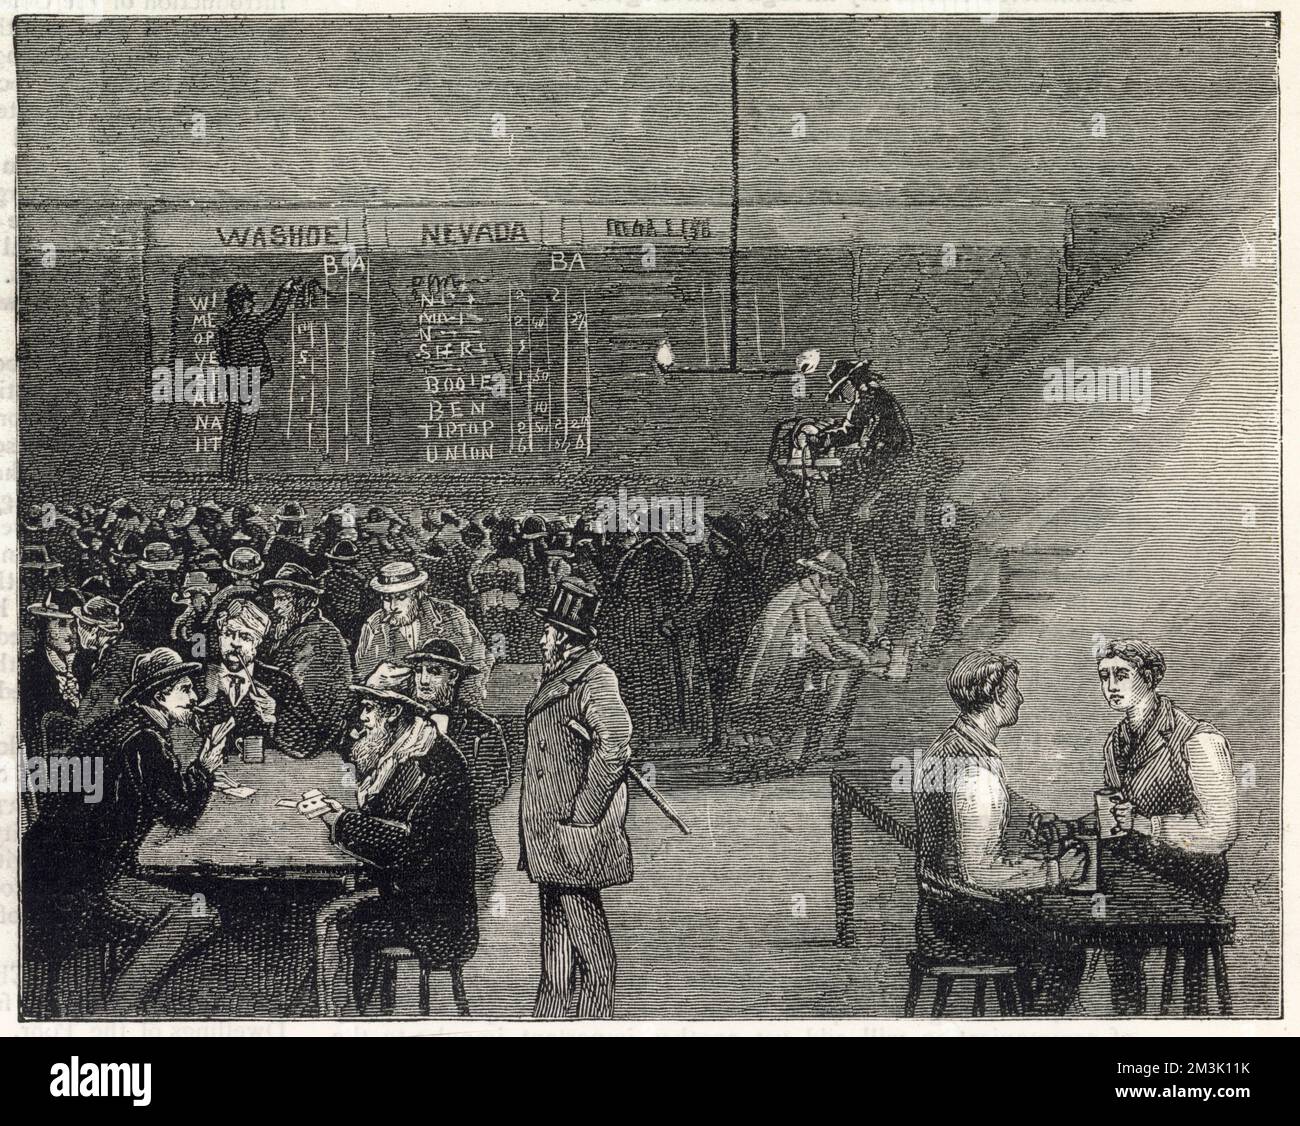 An underground drinking cellar with, in the background, a stock index board marked on the wall, San Francisco. As the city of San Francisco grew in importance more financial trading took place. In this image stock indicators show the state of the market in the other financial centres in the USA, such as Washington and Nevada. Stock Photo